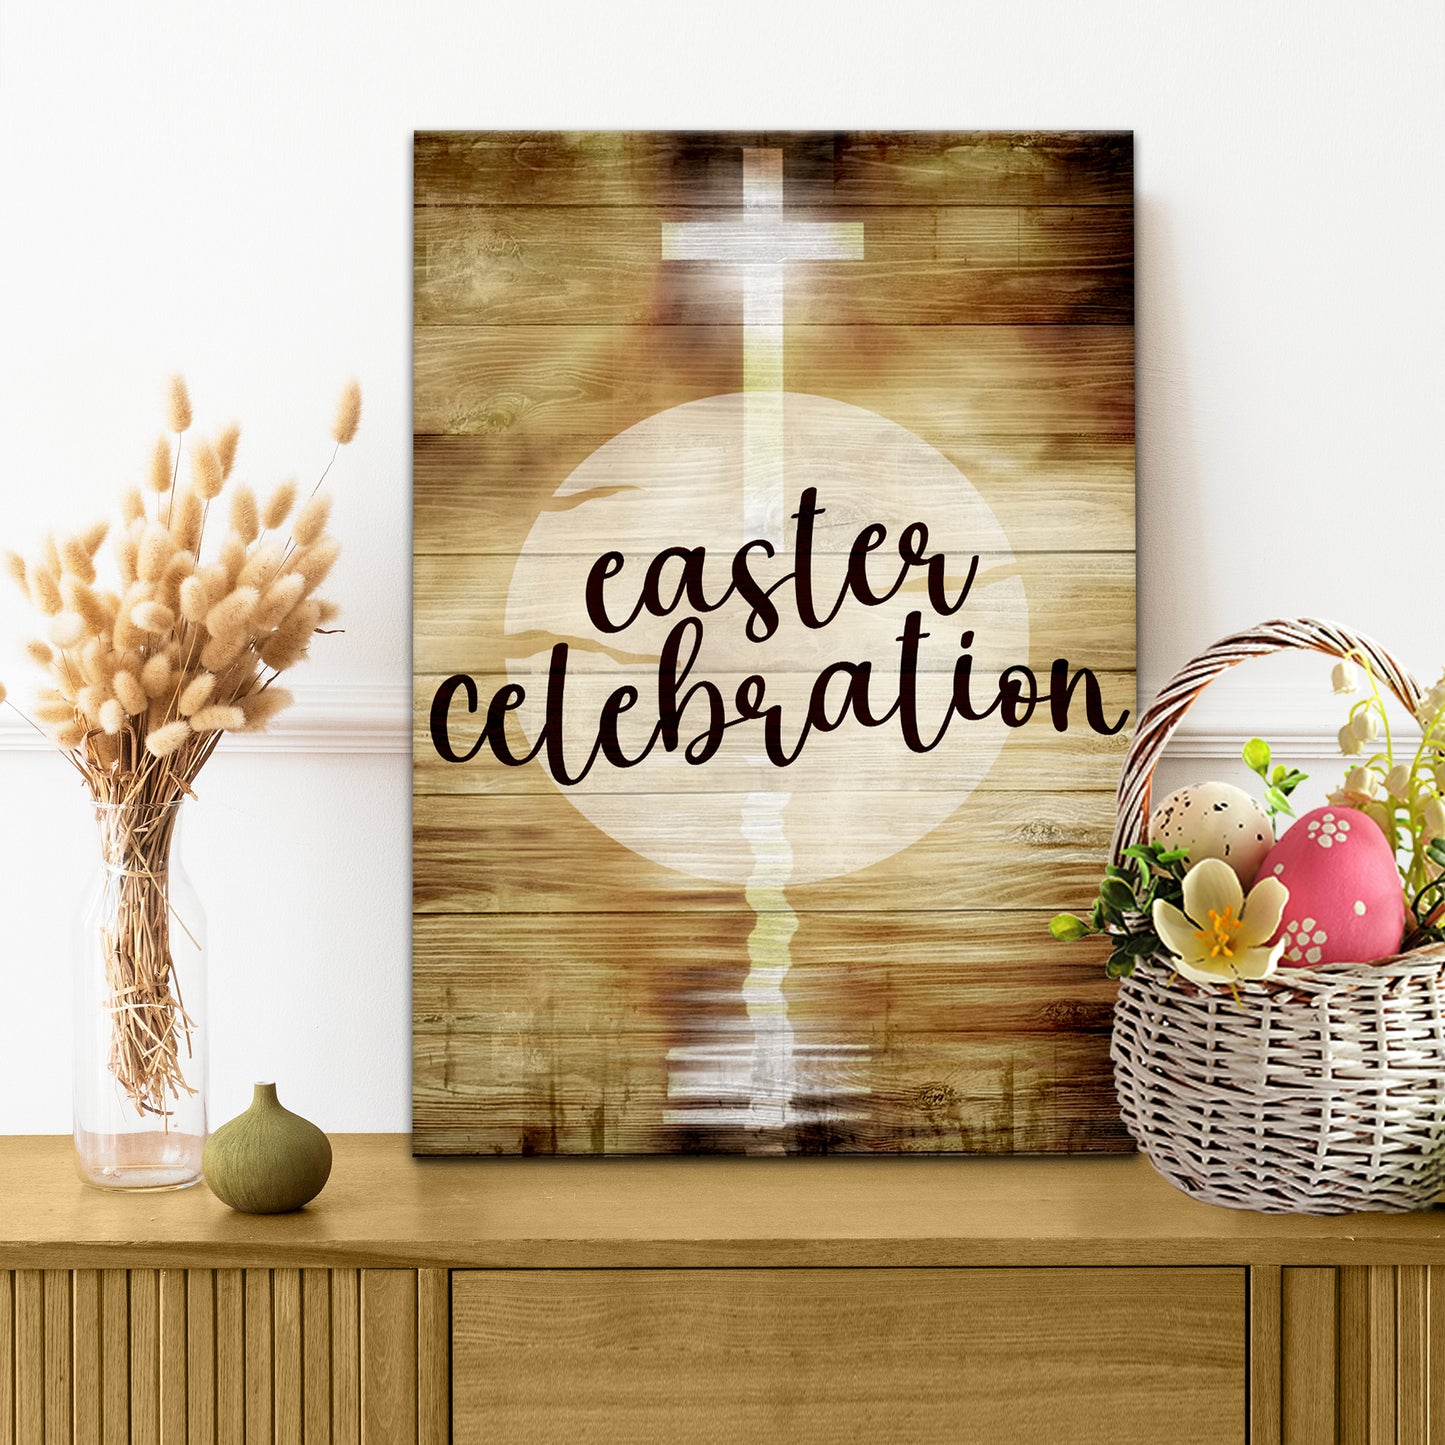 Easter Celebration Sign - Image by Tailored Canvases